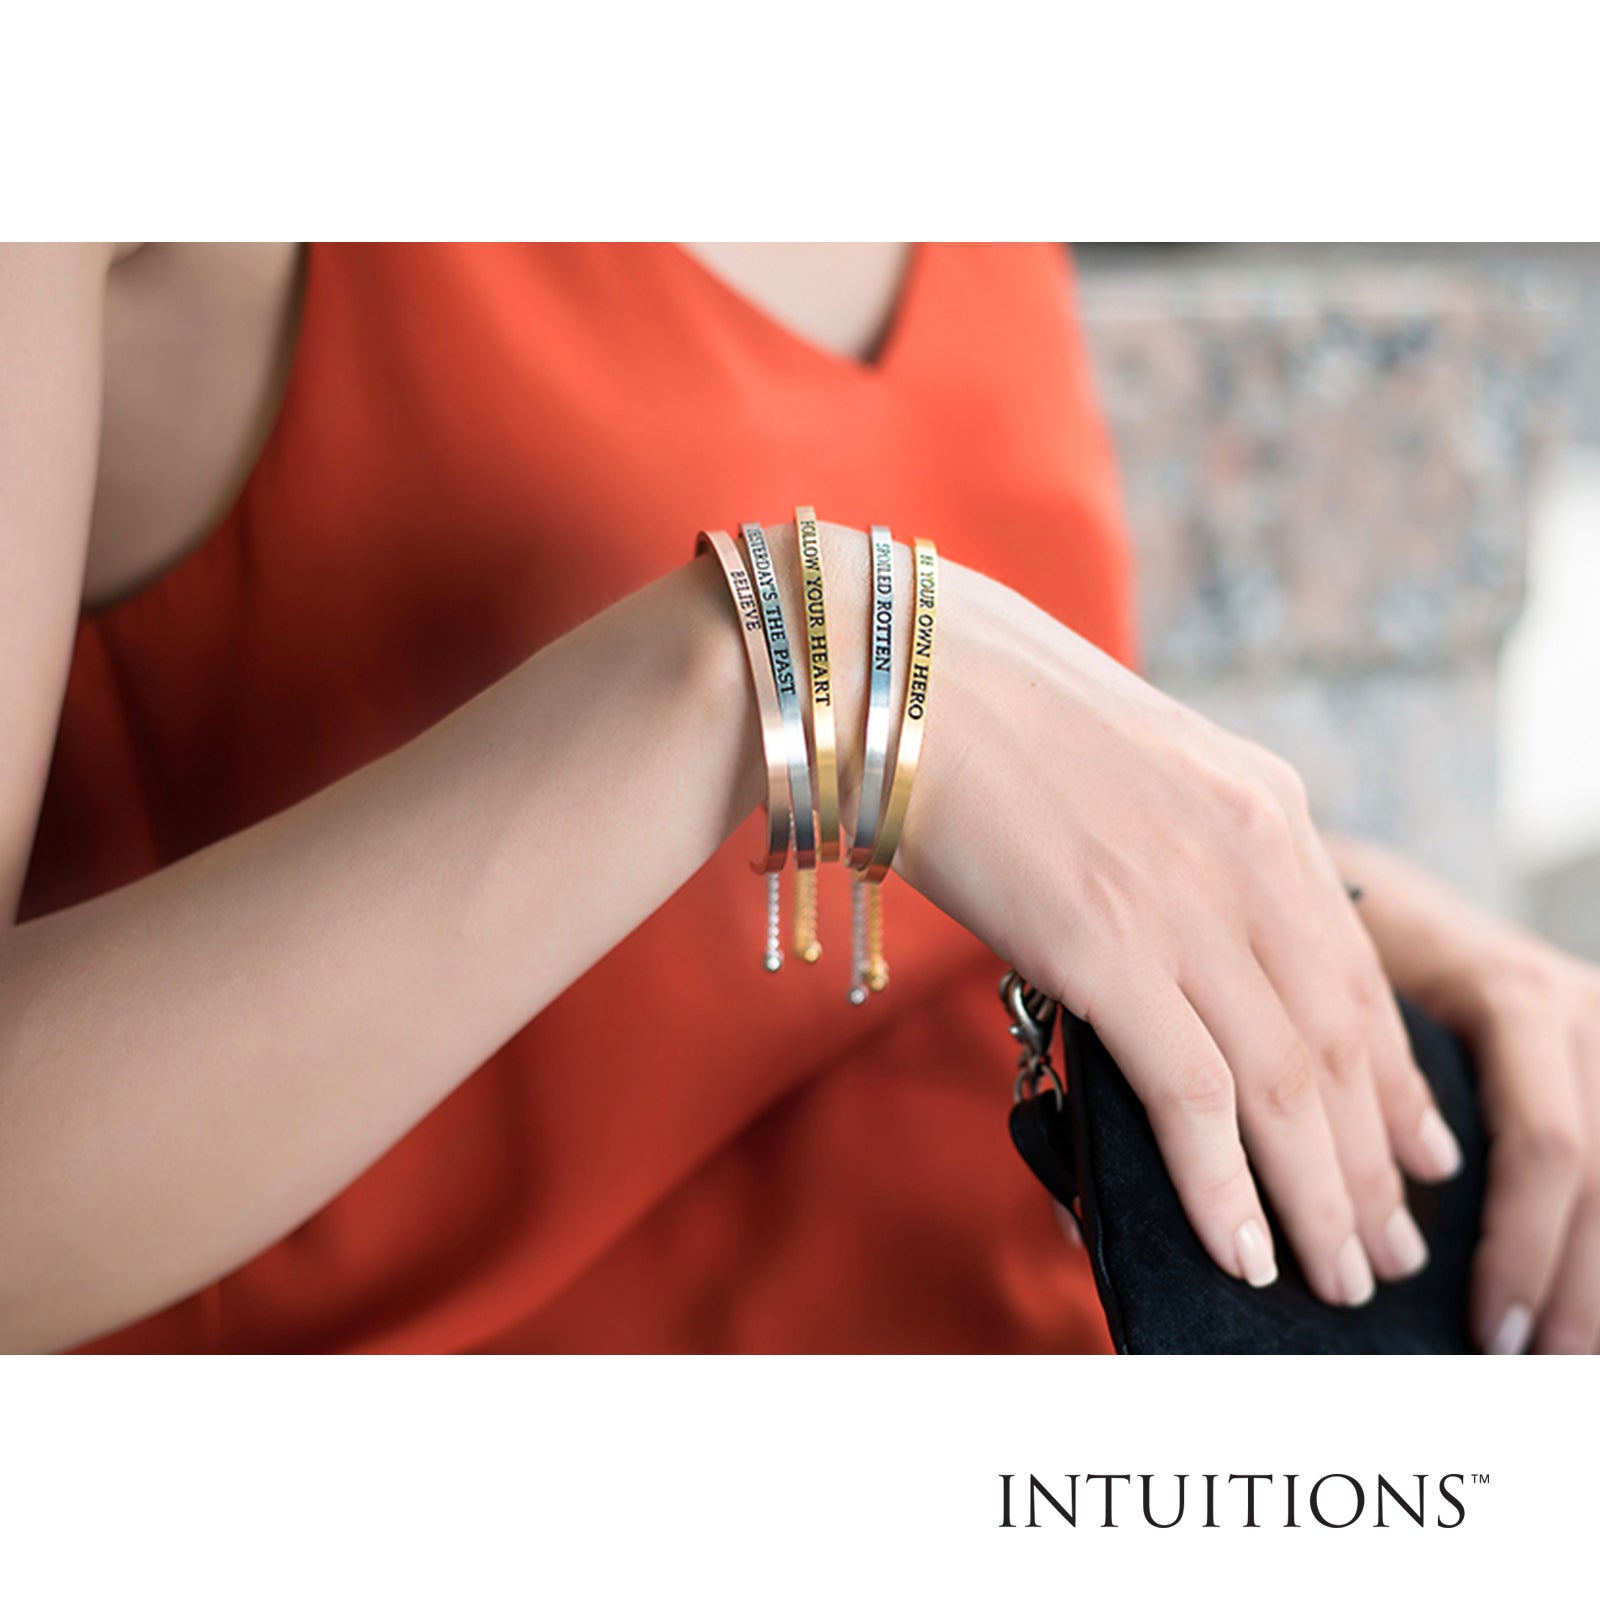 Intuitions Stainless Steel BE YOURSELF.EVERYONE ELSE IS TAKEN. Diamond Accent Cuff Bangle Bracelet fine designer jewelry for men and women